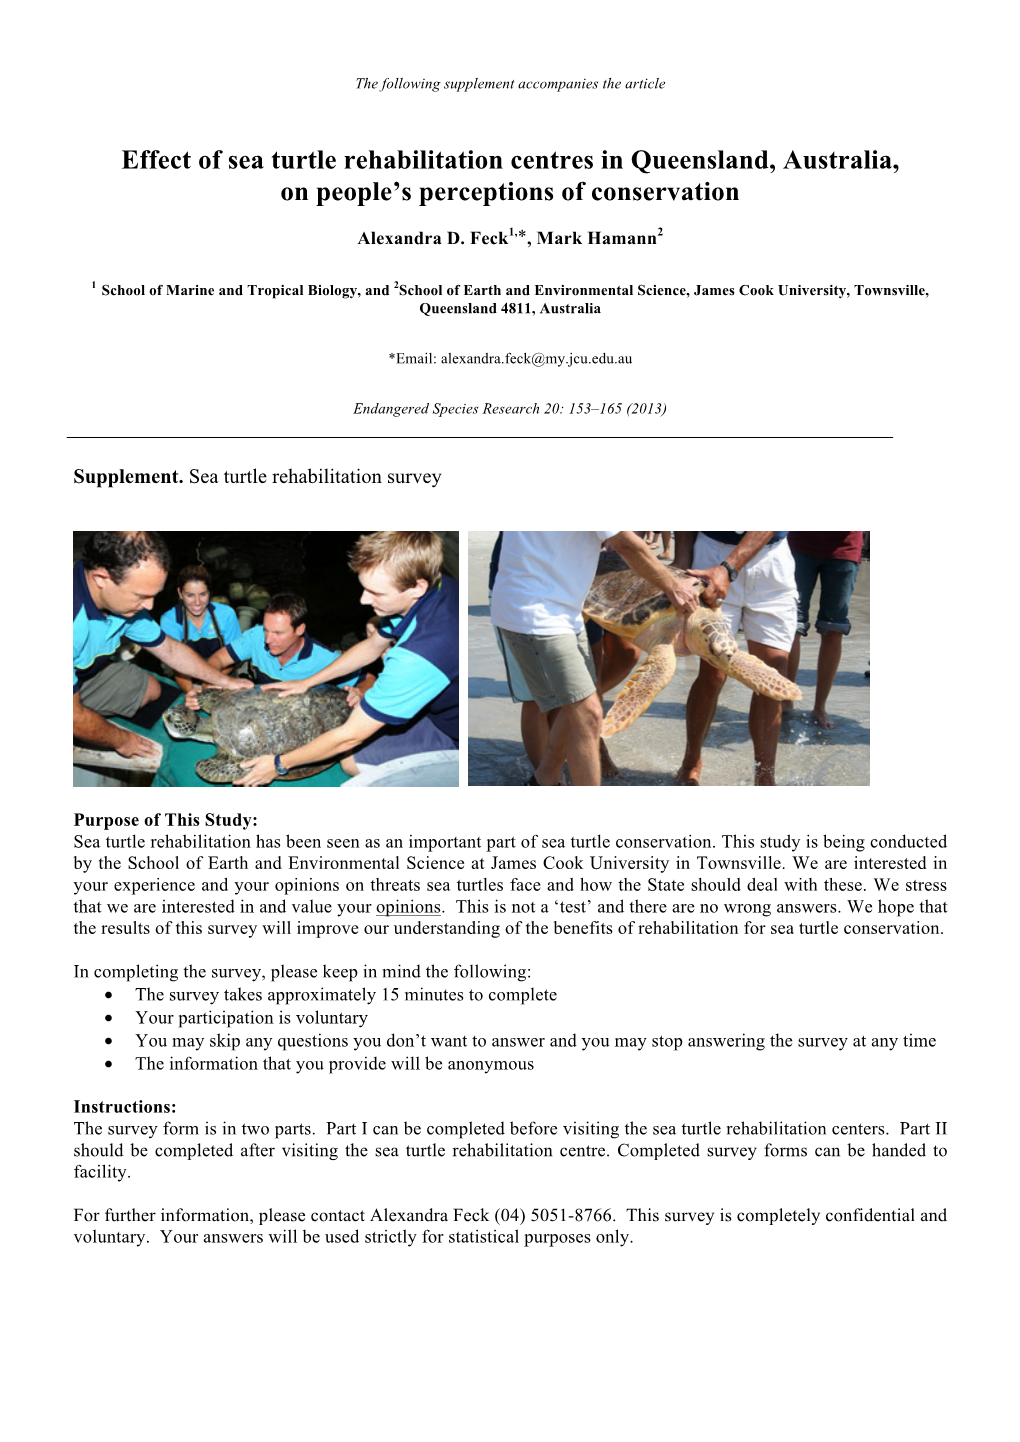 Effect of Sea Turtle Rehabilitation Centres in Queensland, Australia, on People’S Perceptions of Conservation